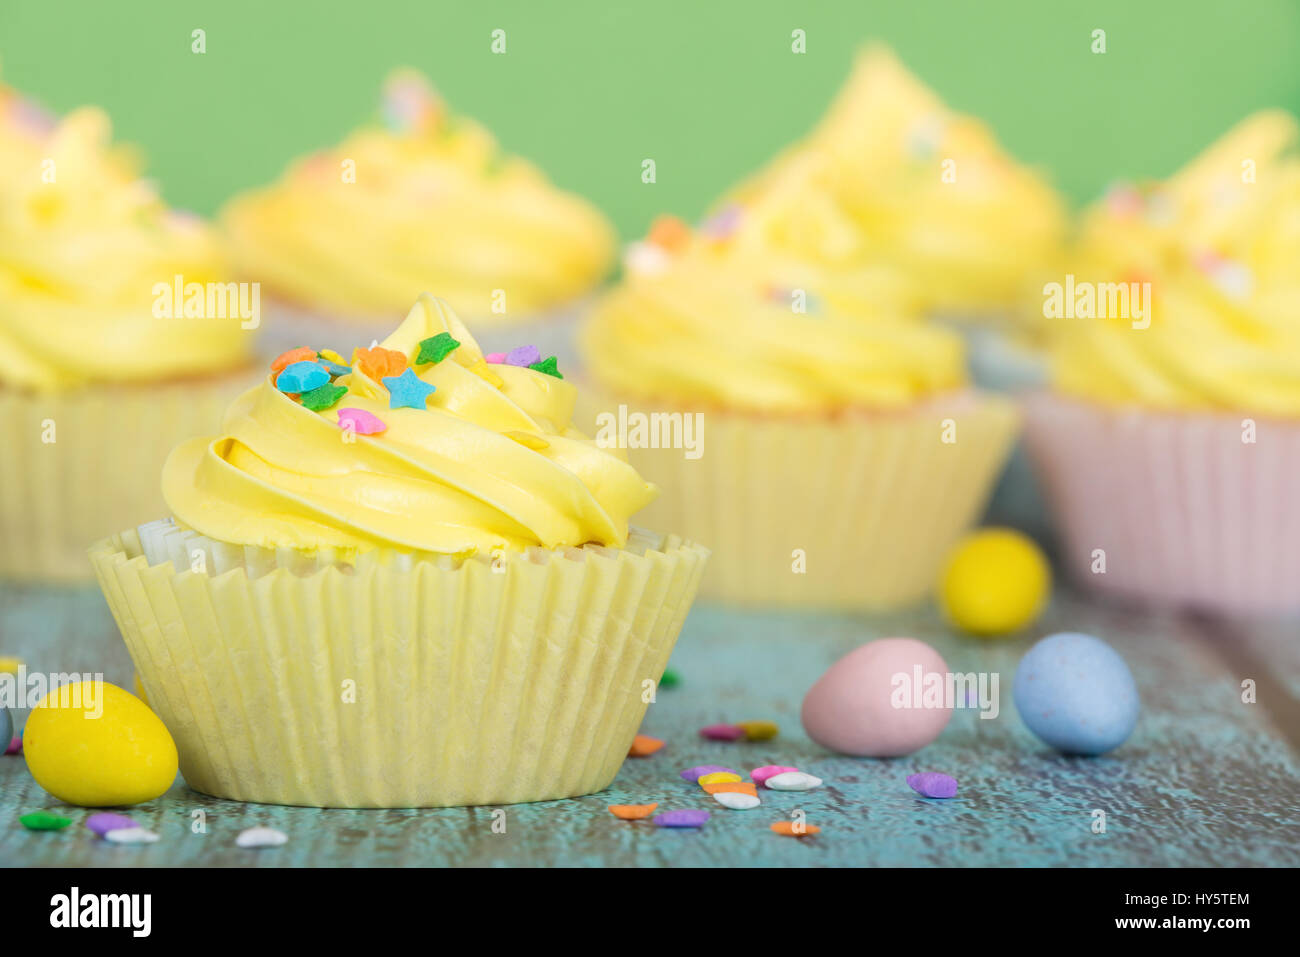 Yellow Easter cupcakes with candy and sprinkles. Green background. Stock Photo